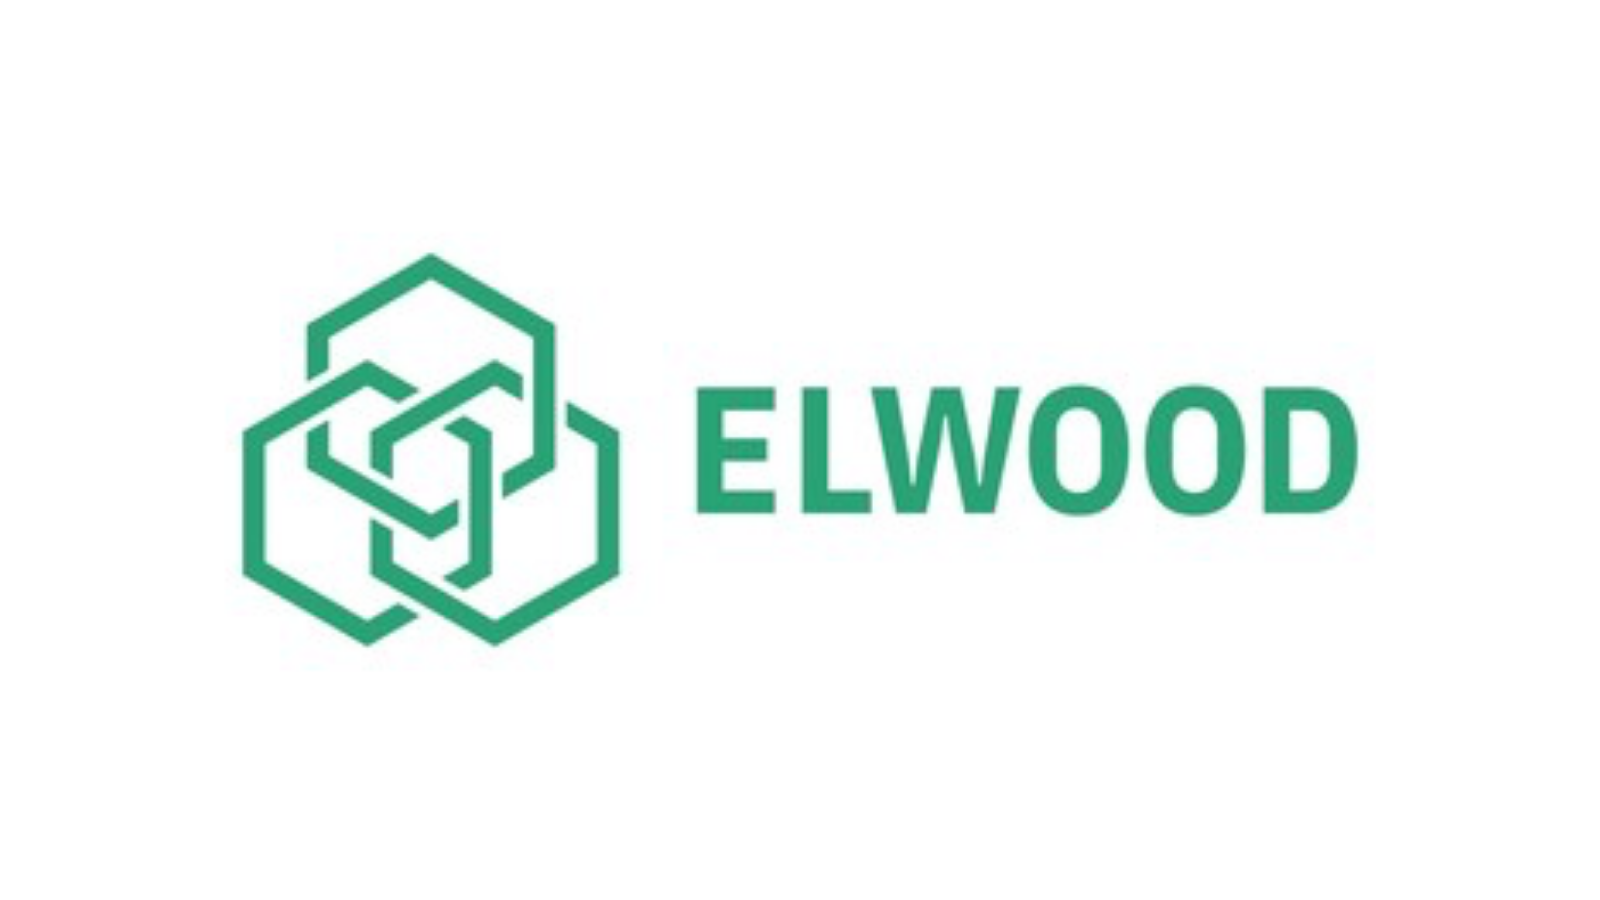 Alan Howard's Digital Assets Tech Firm Elwood Technologies Closes $70M Series A co-Led by Goldman Sachs and Dawn Capital